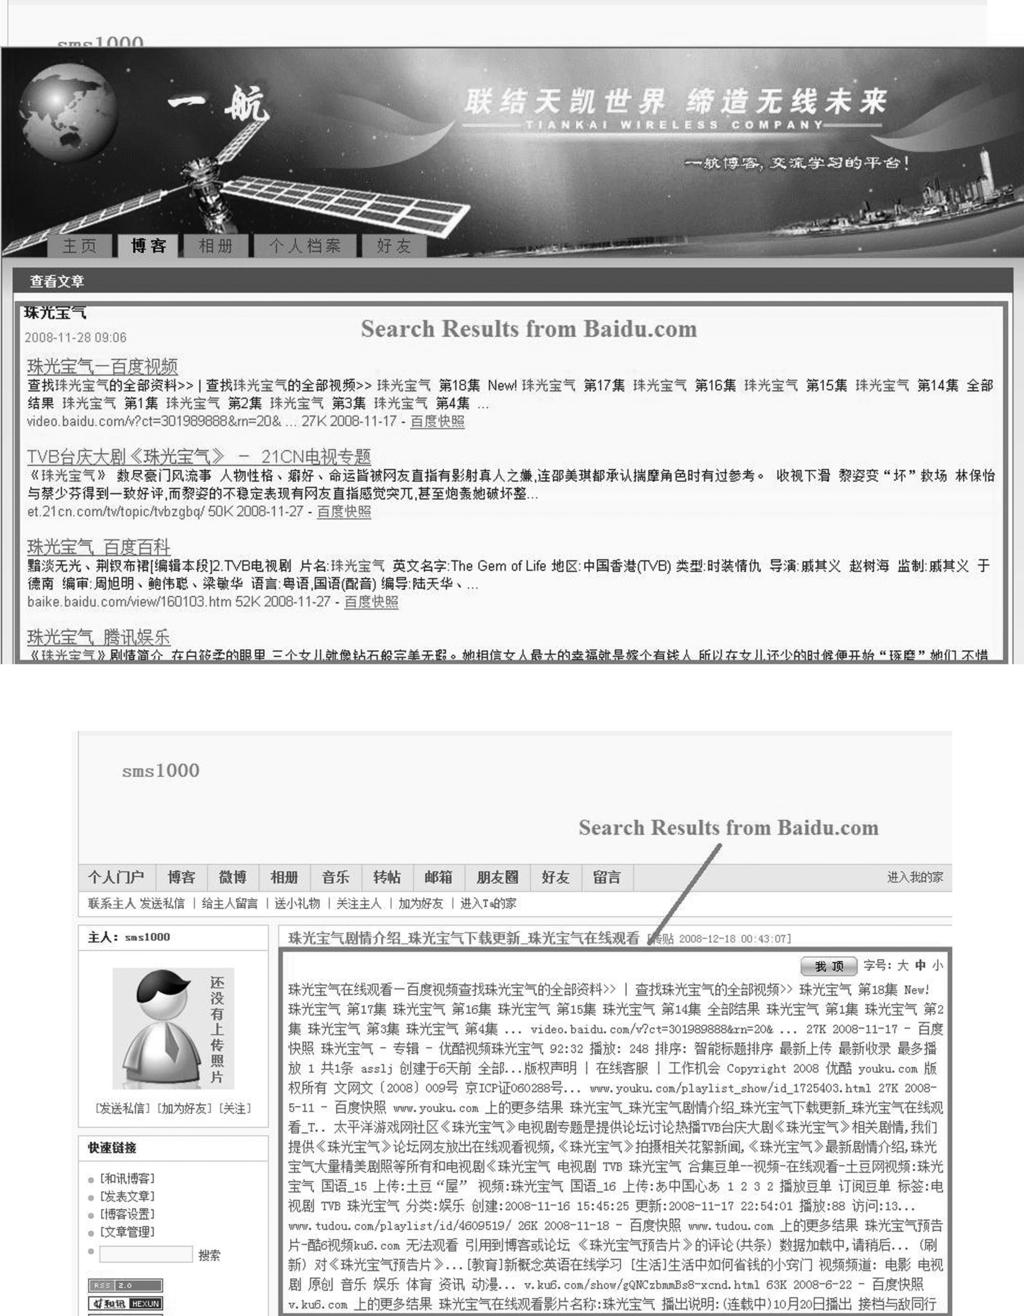 2:24 Y. Liu et al. Fig. 9. Two spam pages that used search results of a popular honeypot query? (The Gem of Life, a popular TV show) as its content. ((a) http://hi.baidu.